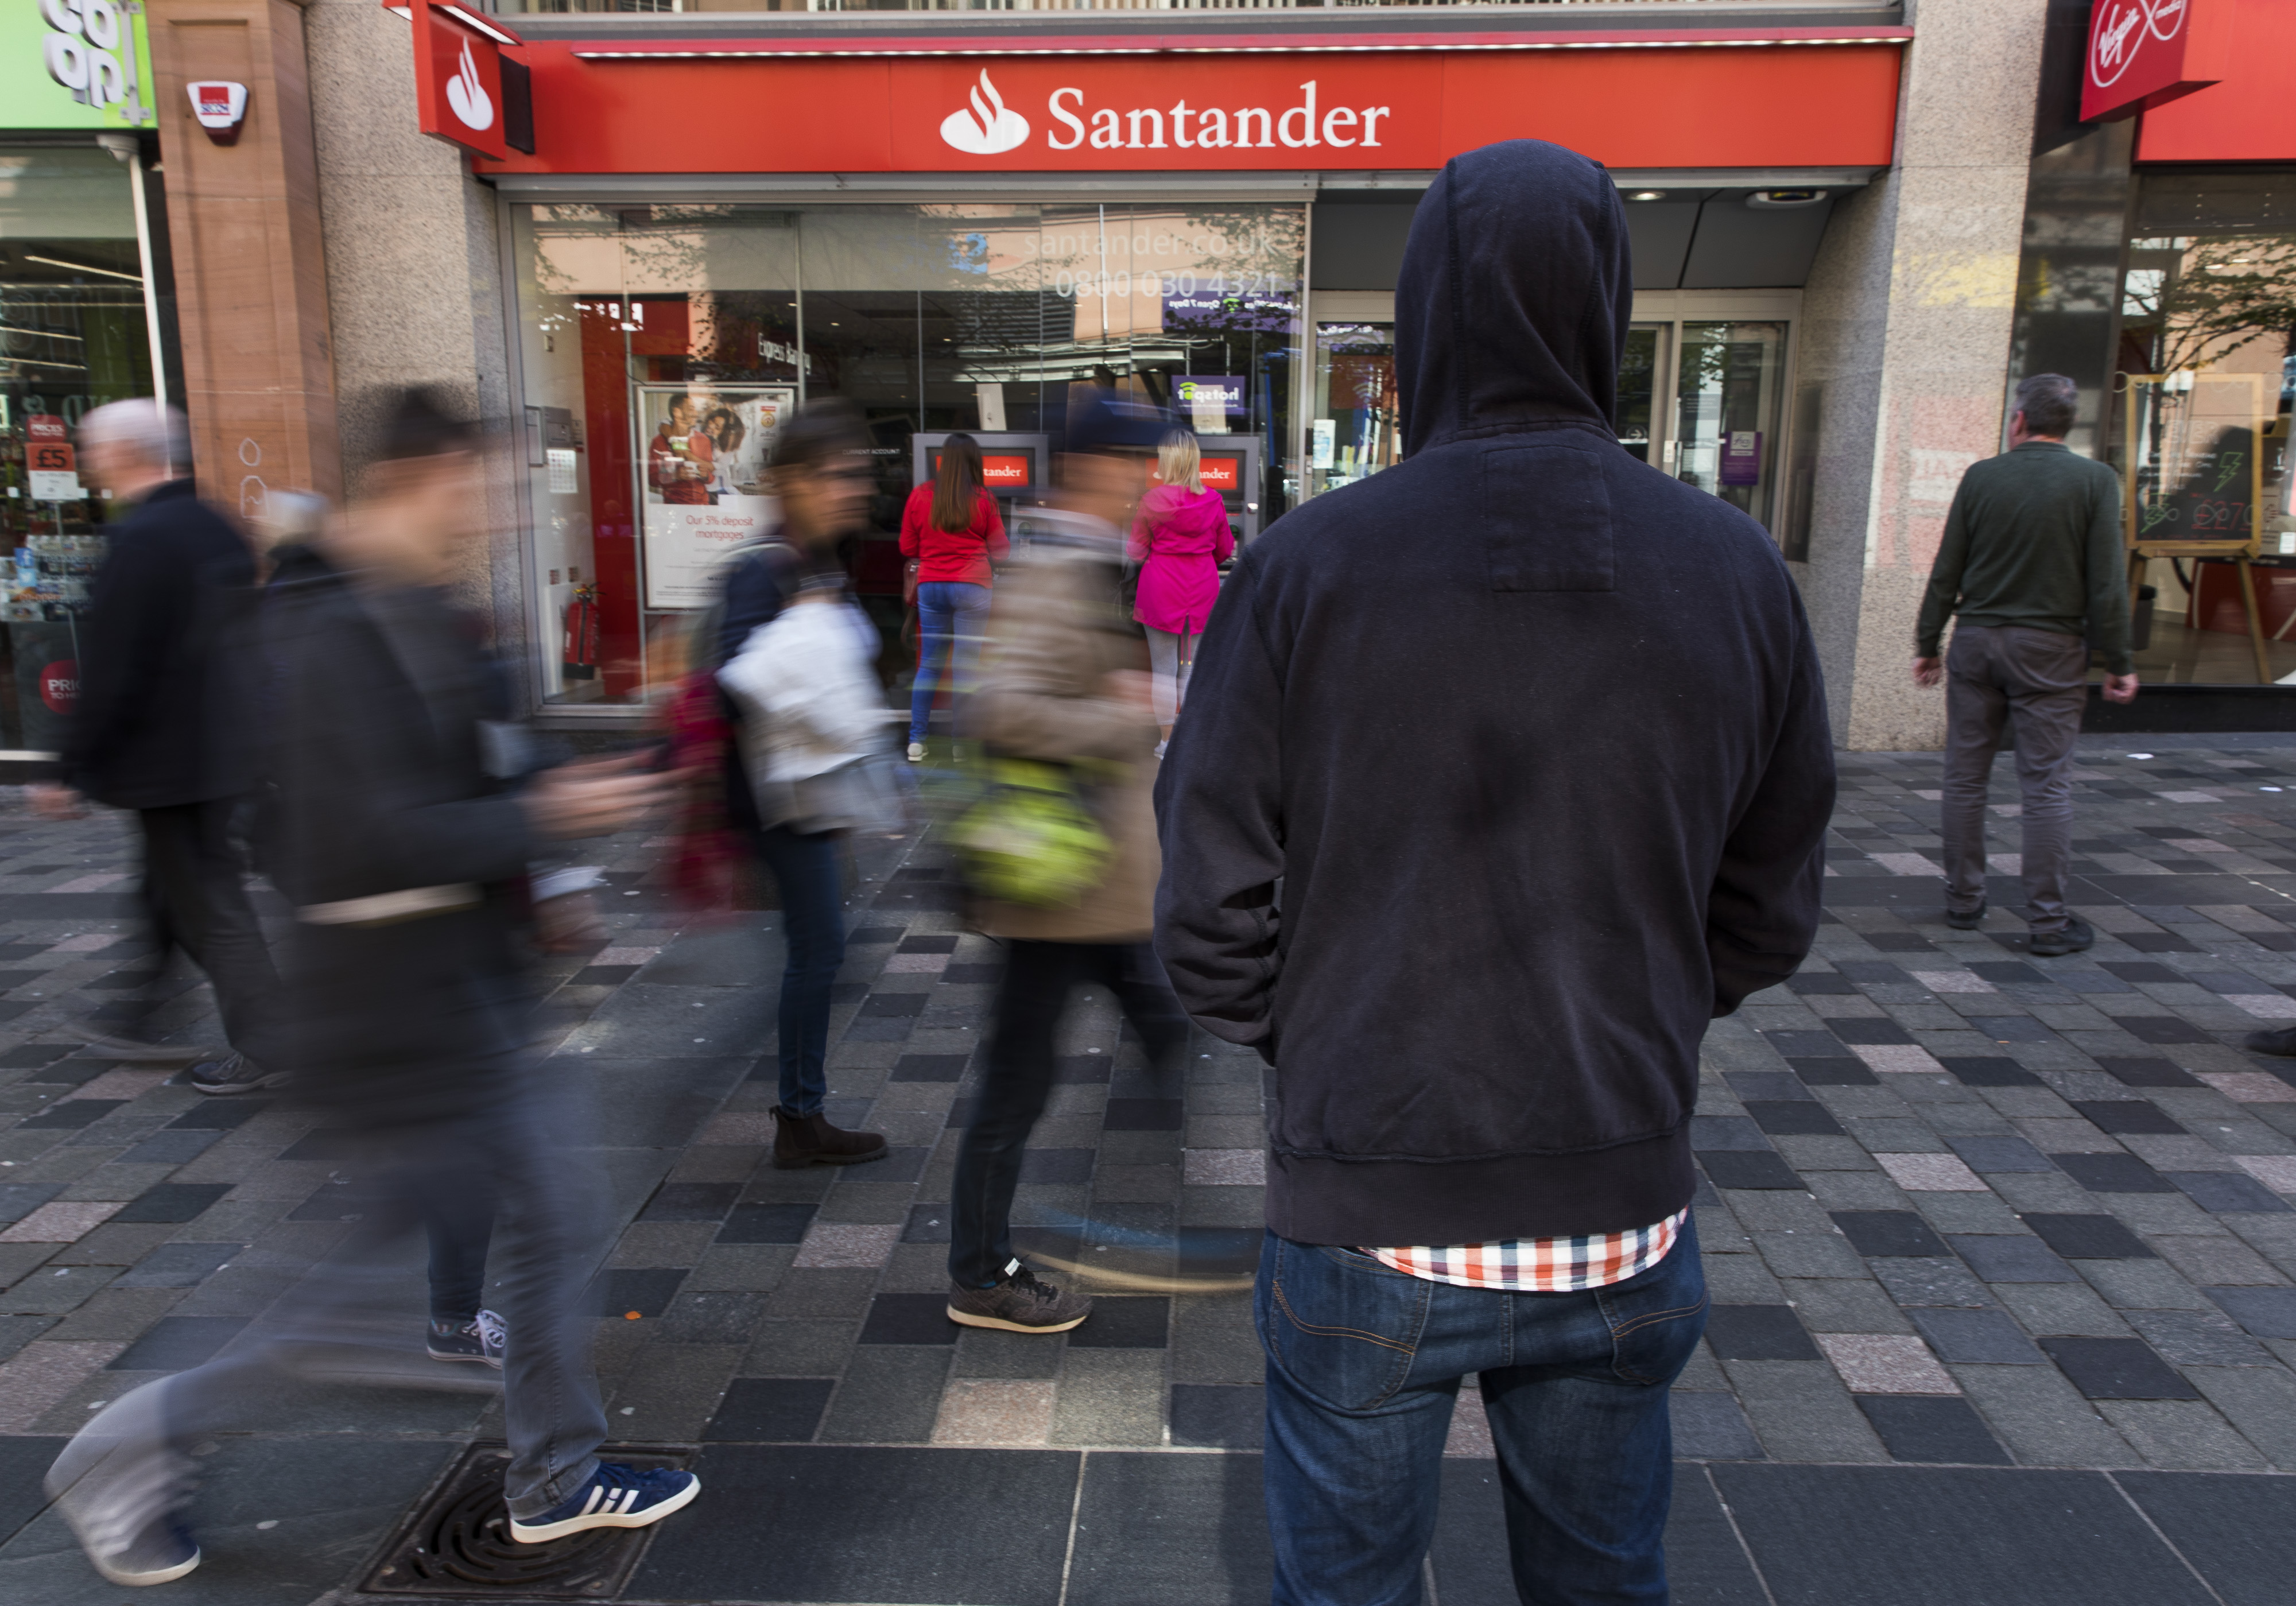 The money launderer revealed Santander branches in Glasgow, like the one above, were a favourite because, at that time, security seemed to be lax